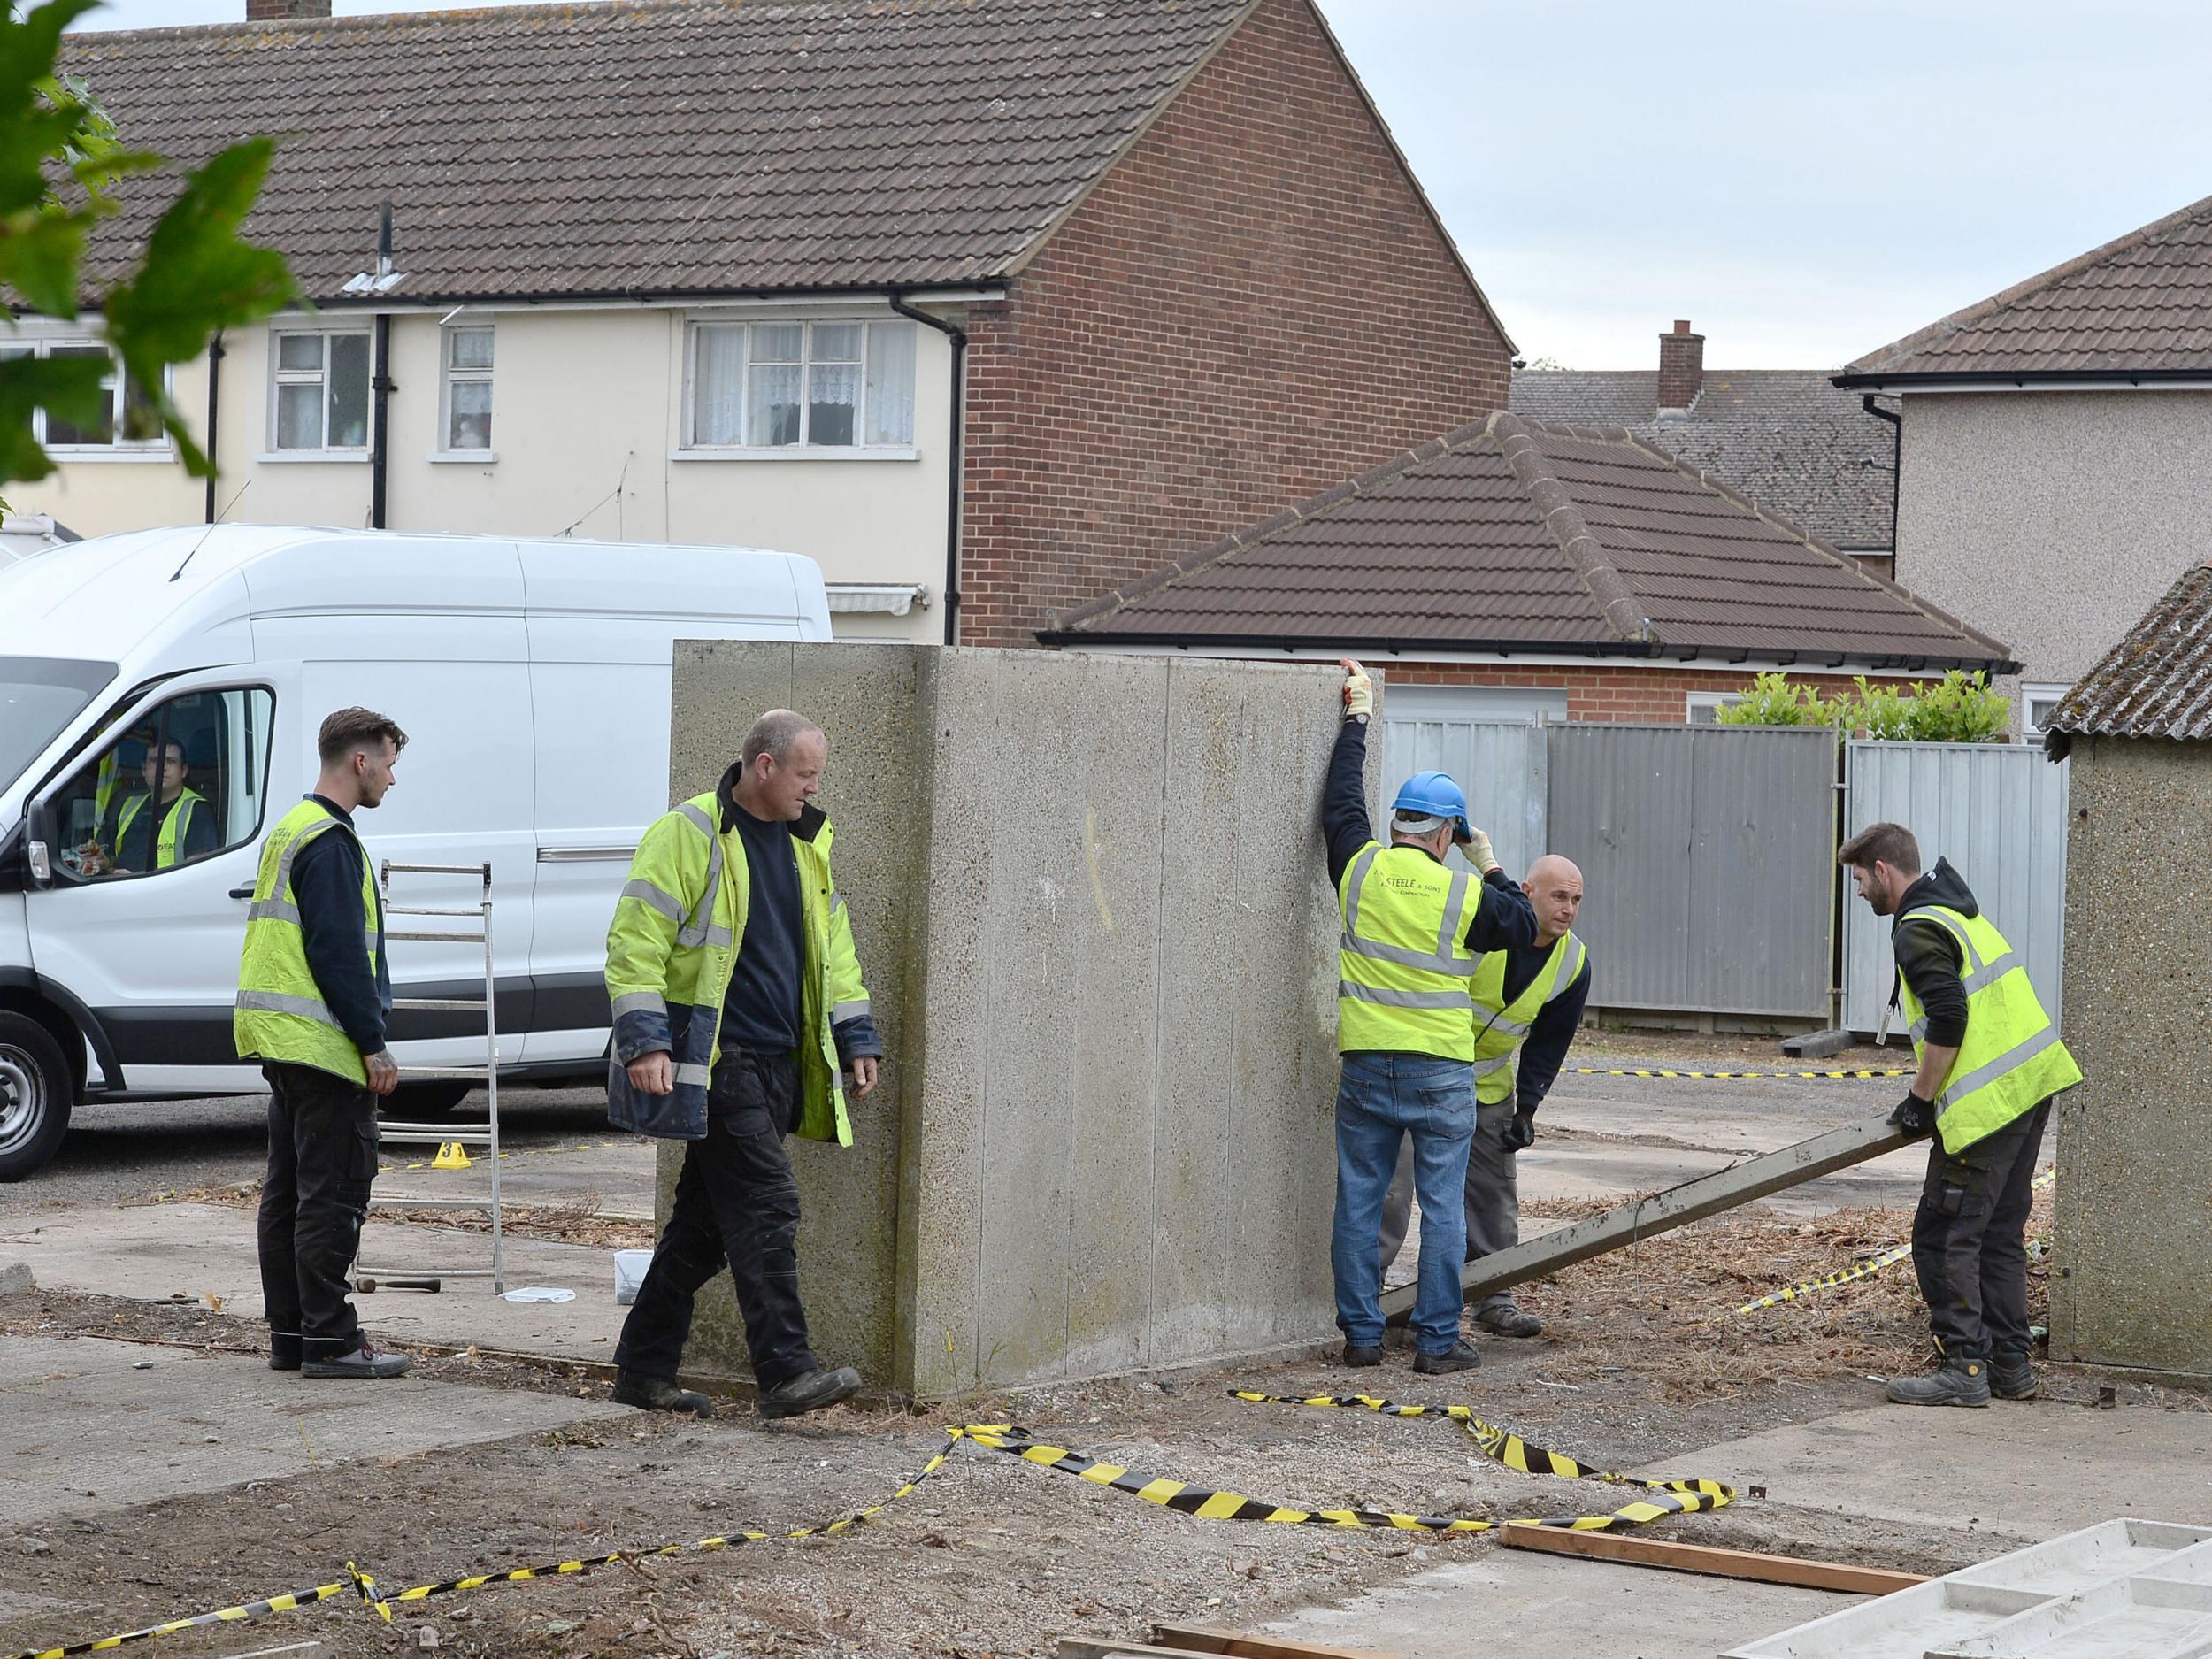 Workers start to dismantle a garage at the scene between Goddard Road and Crammavill Street in Stifford Clays, Thurrock, where they are searching for the body of schoolgirl Danielle Jones who went missing in 2001